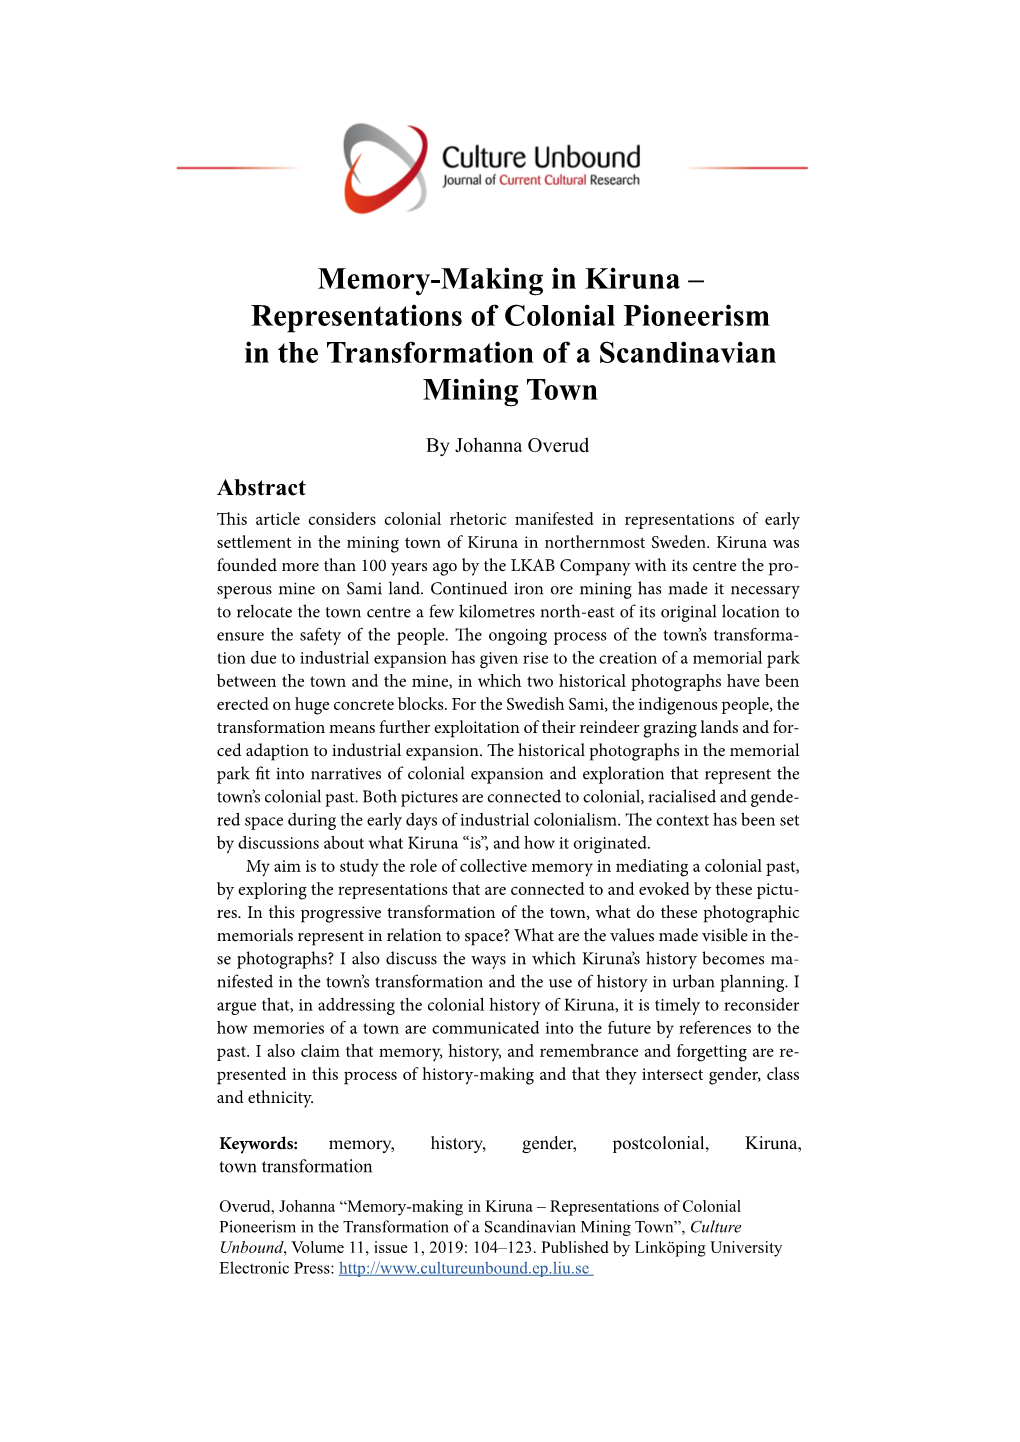 Memory-Making in Kiruna – Representations of Colonial Pioneerism in the Transformation of a Scandinavian Mining Town